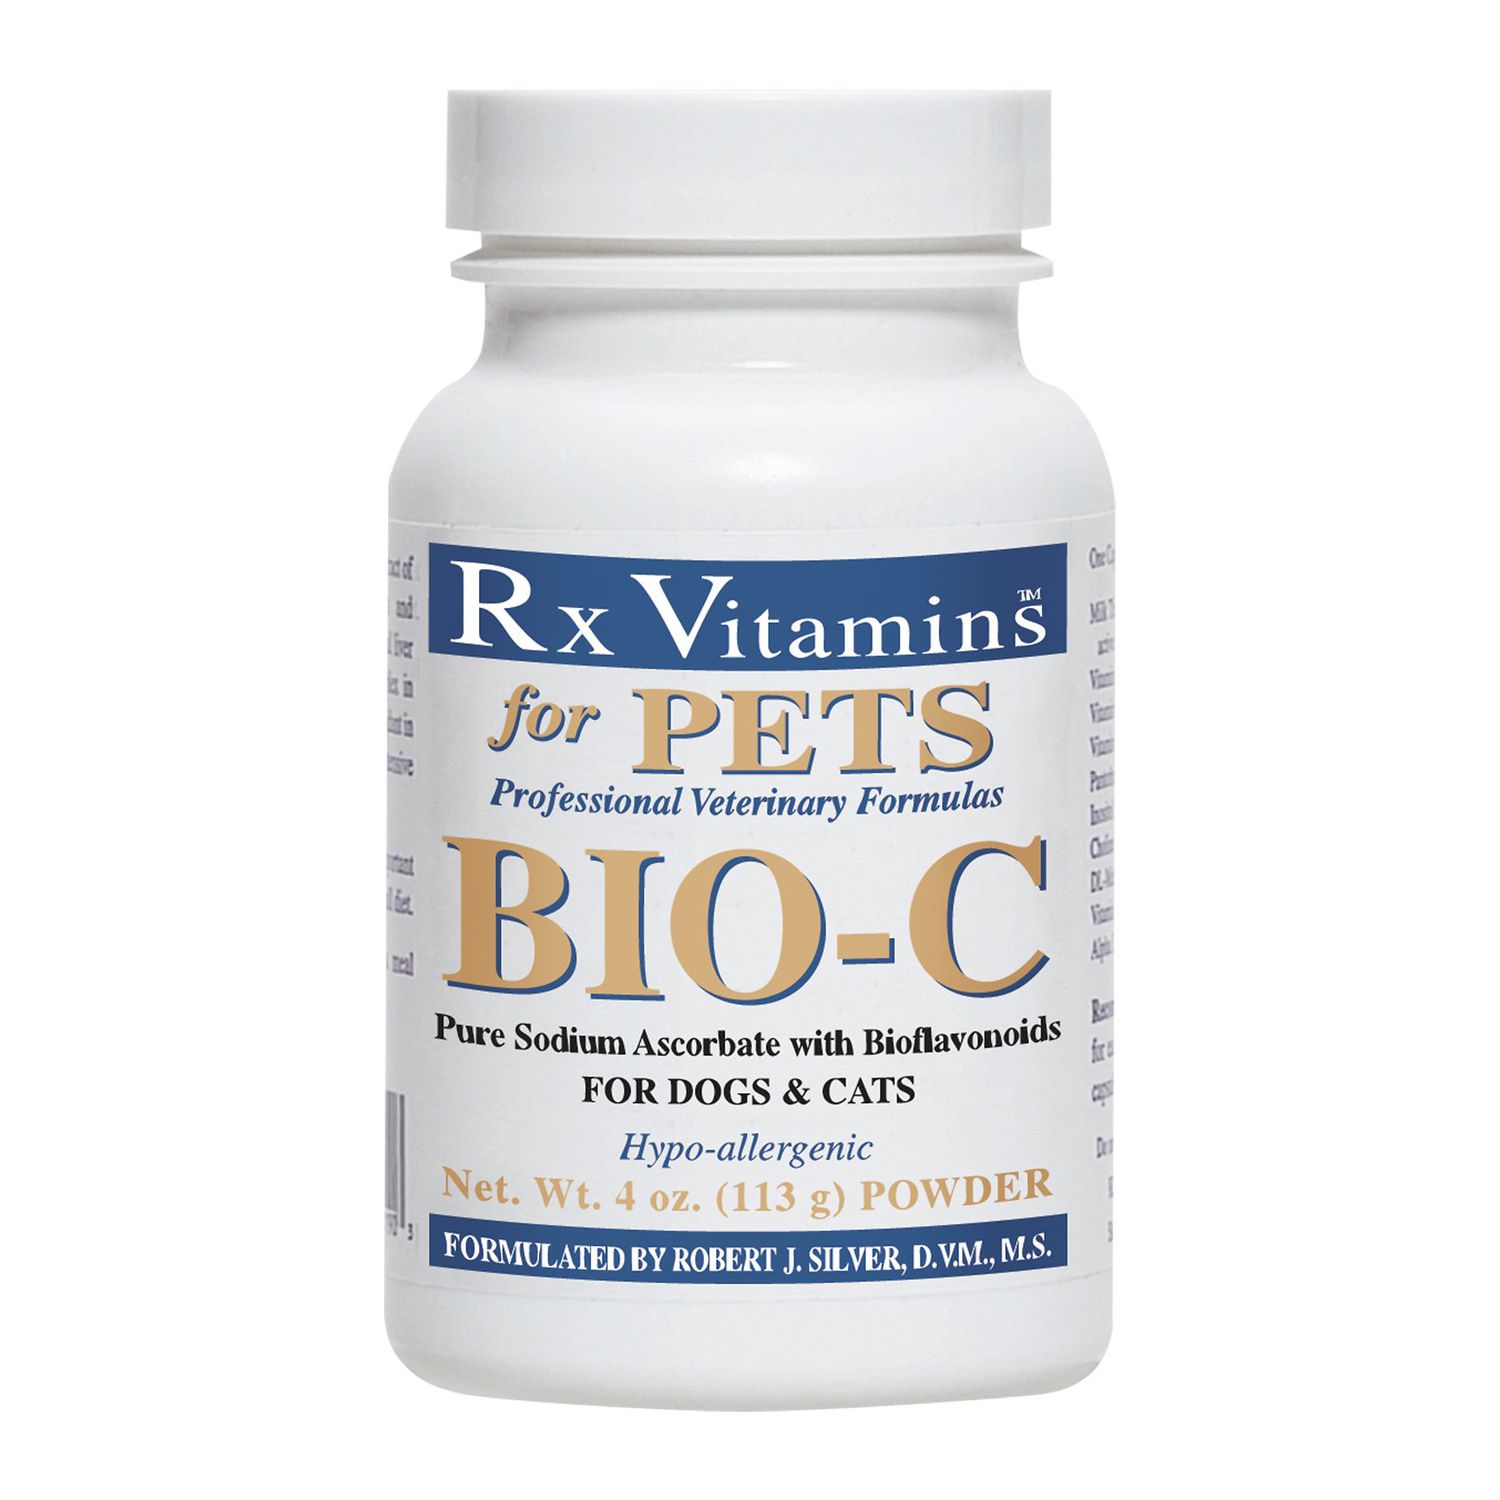 rx-vitamins-for-pets-bio-c-for-dogs-and-cats-vitamin-c-supplement